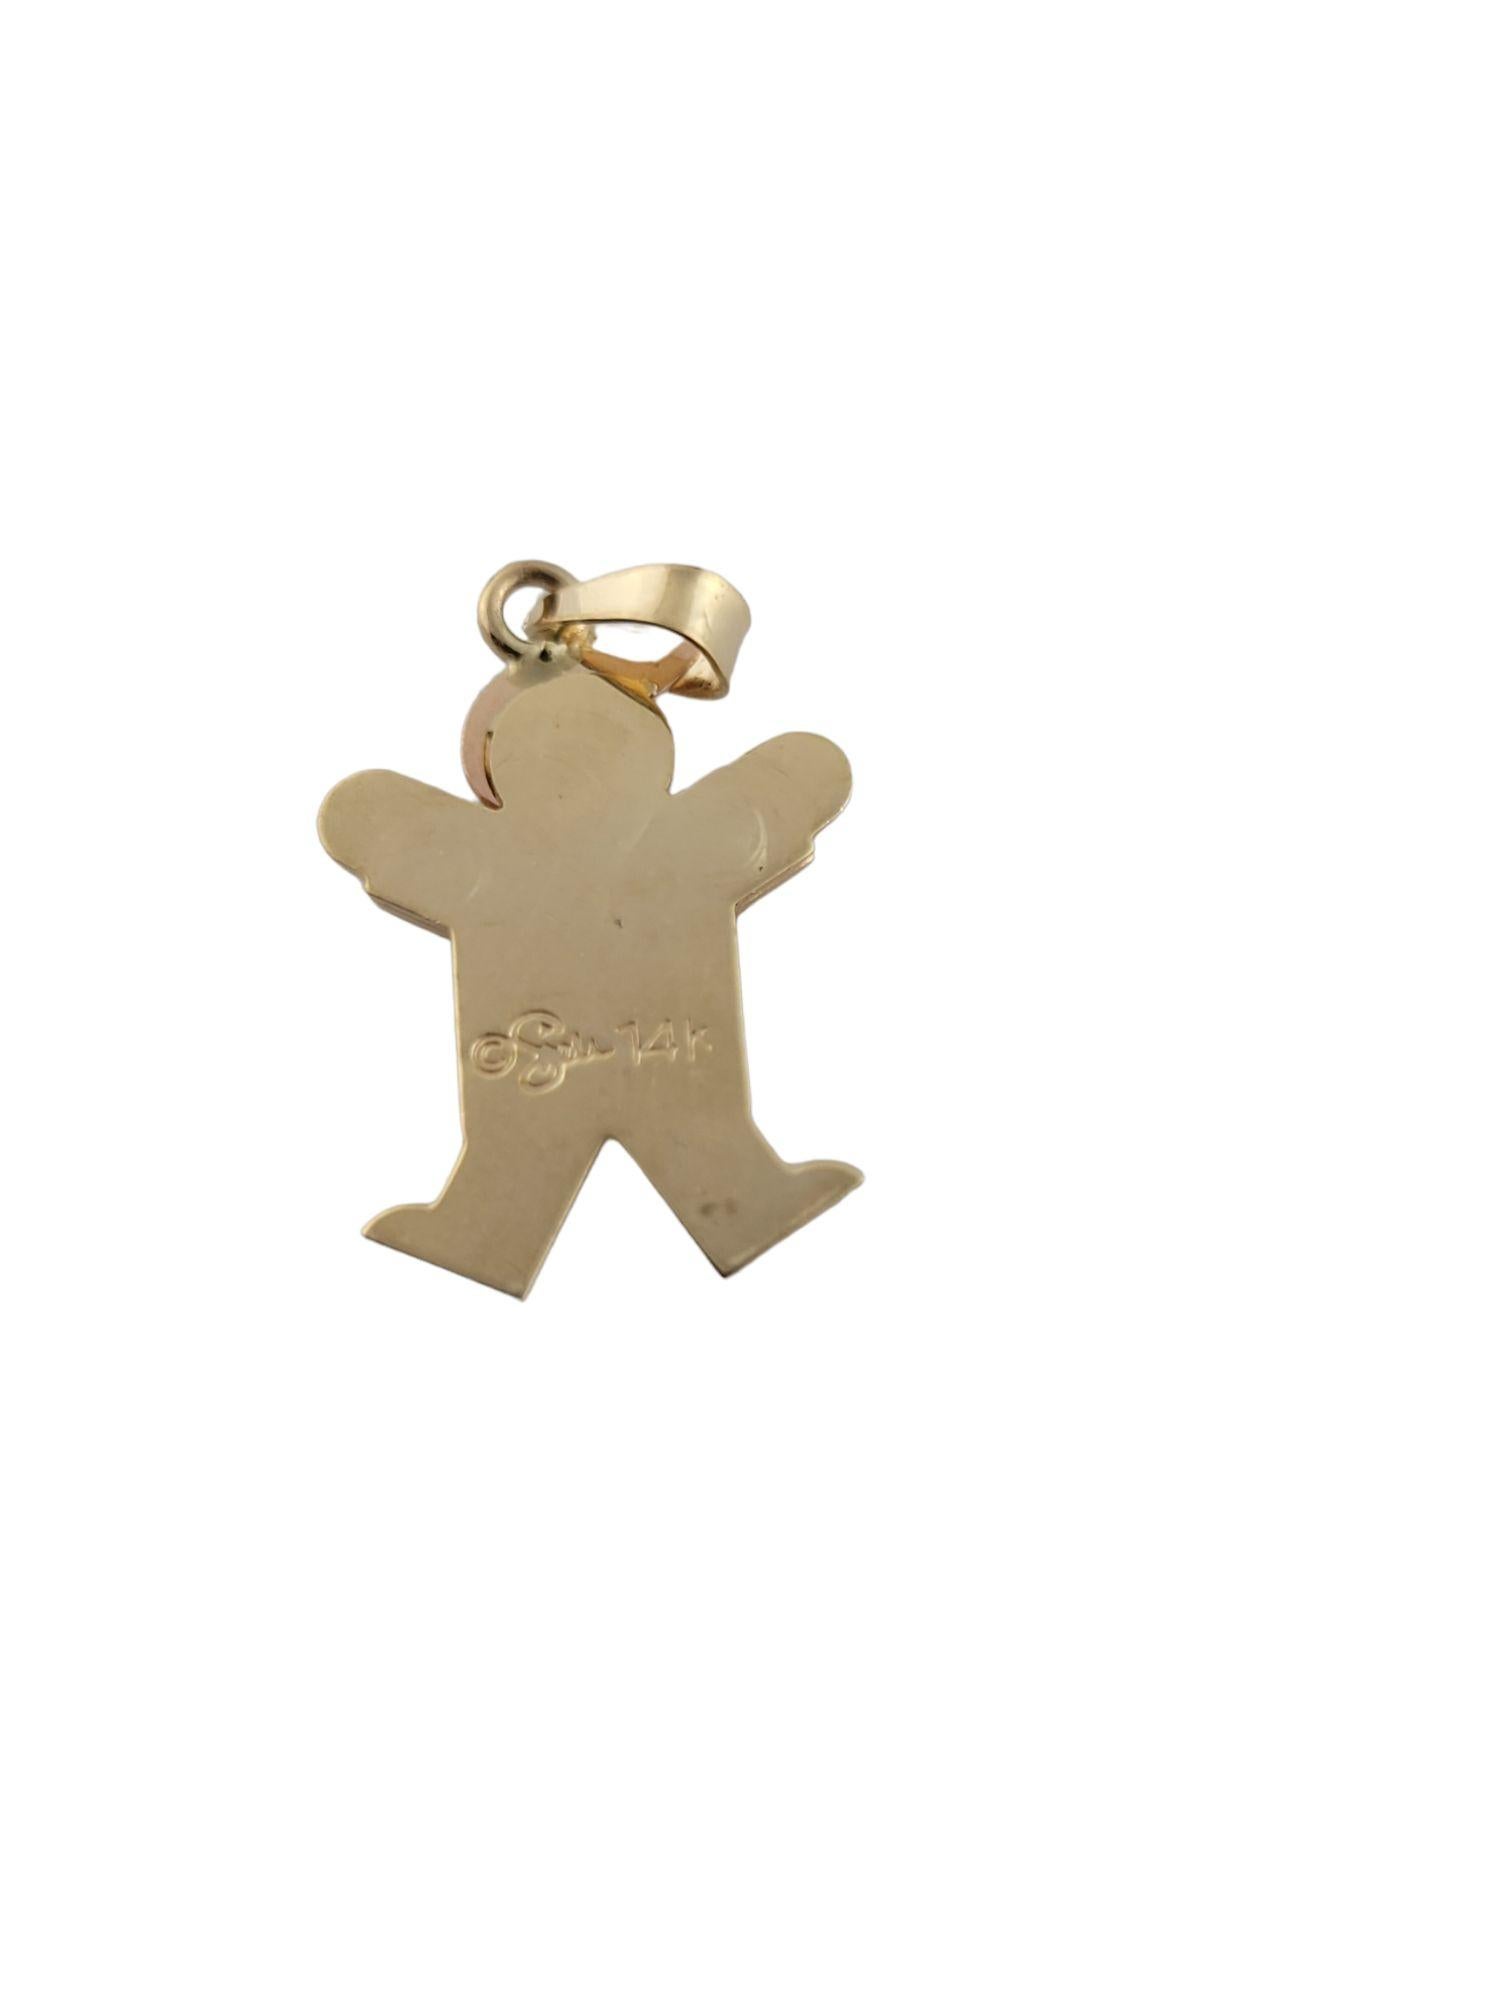 14K Yellow Gold Little Boy Charm #12946 In Good Condition For Sale In Washington Depot, CT